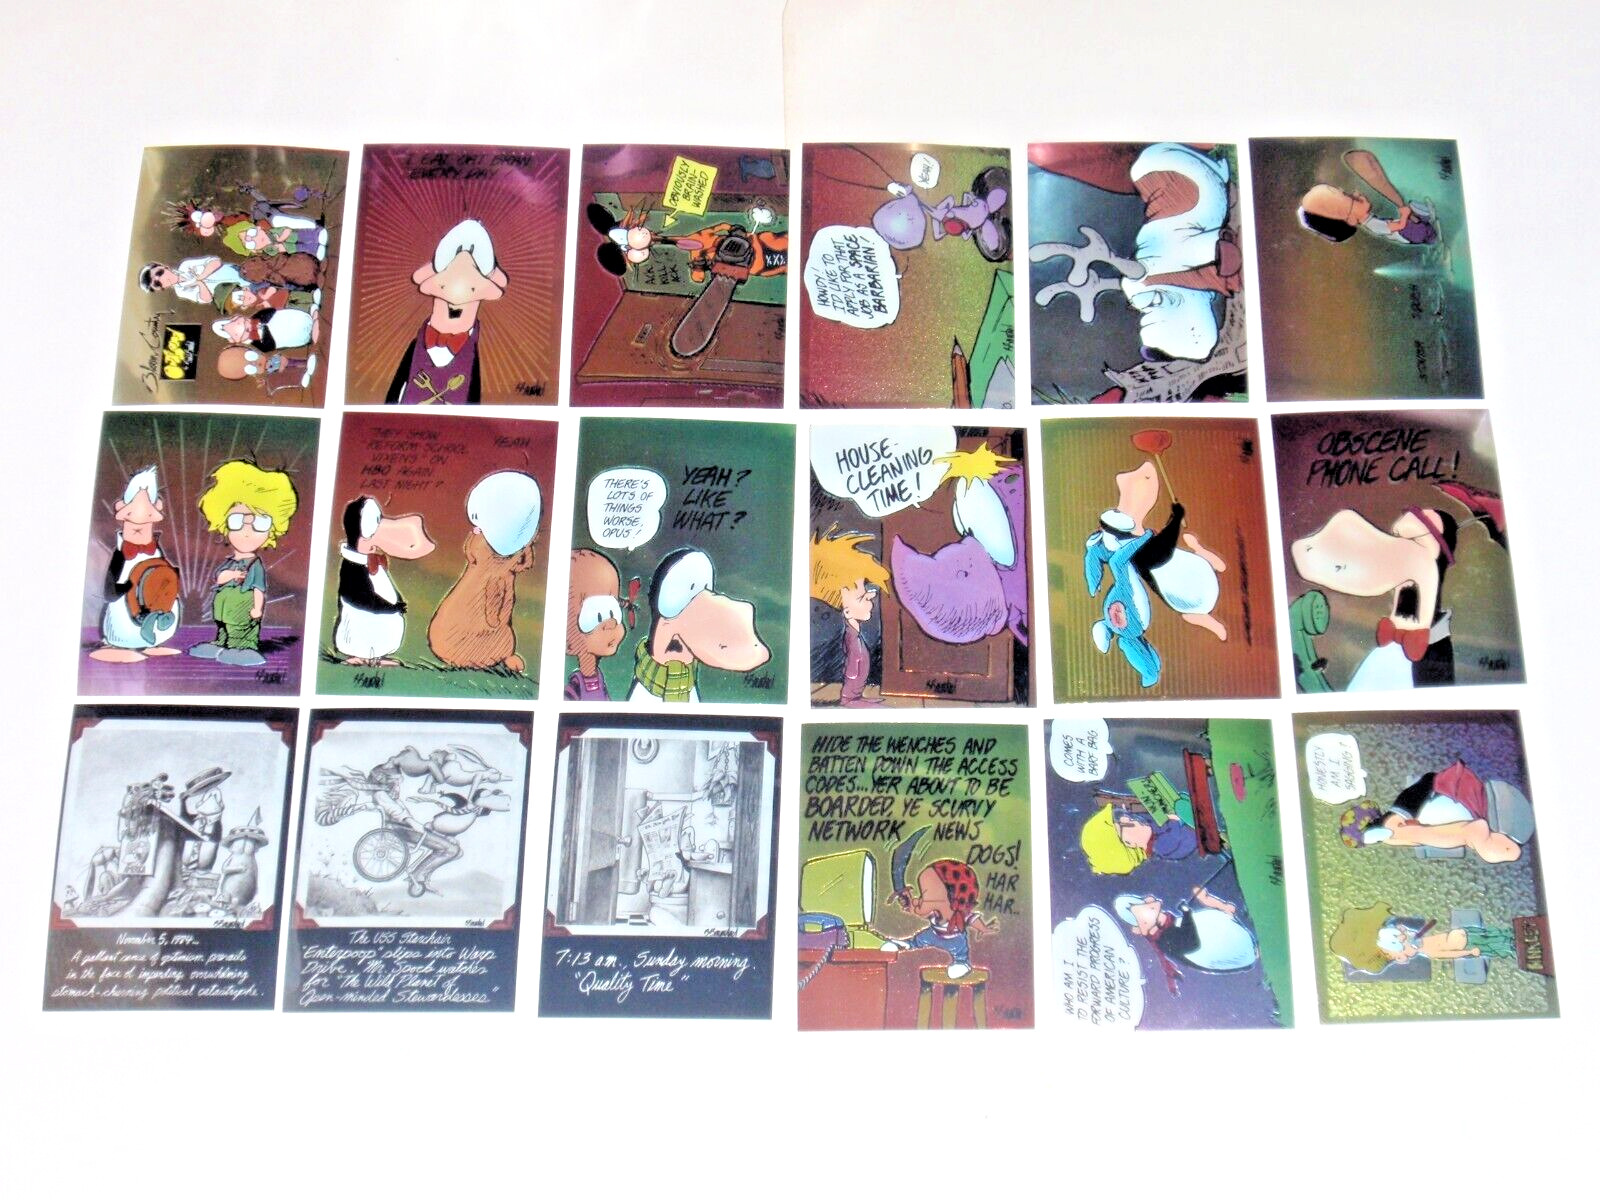 1995 BLOOM COUNTY & OUTLAND CHROMIUM BASE 100 CARD SET BERKELEY BREATHED